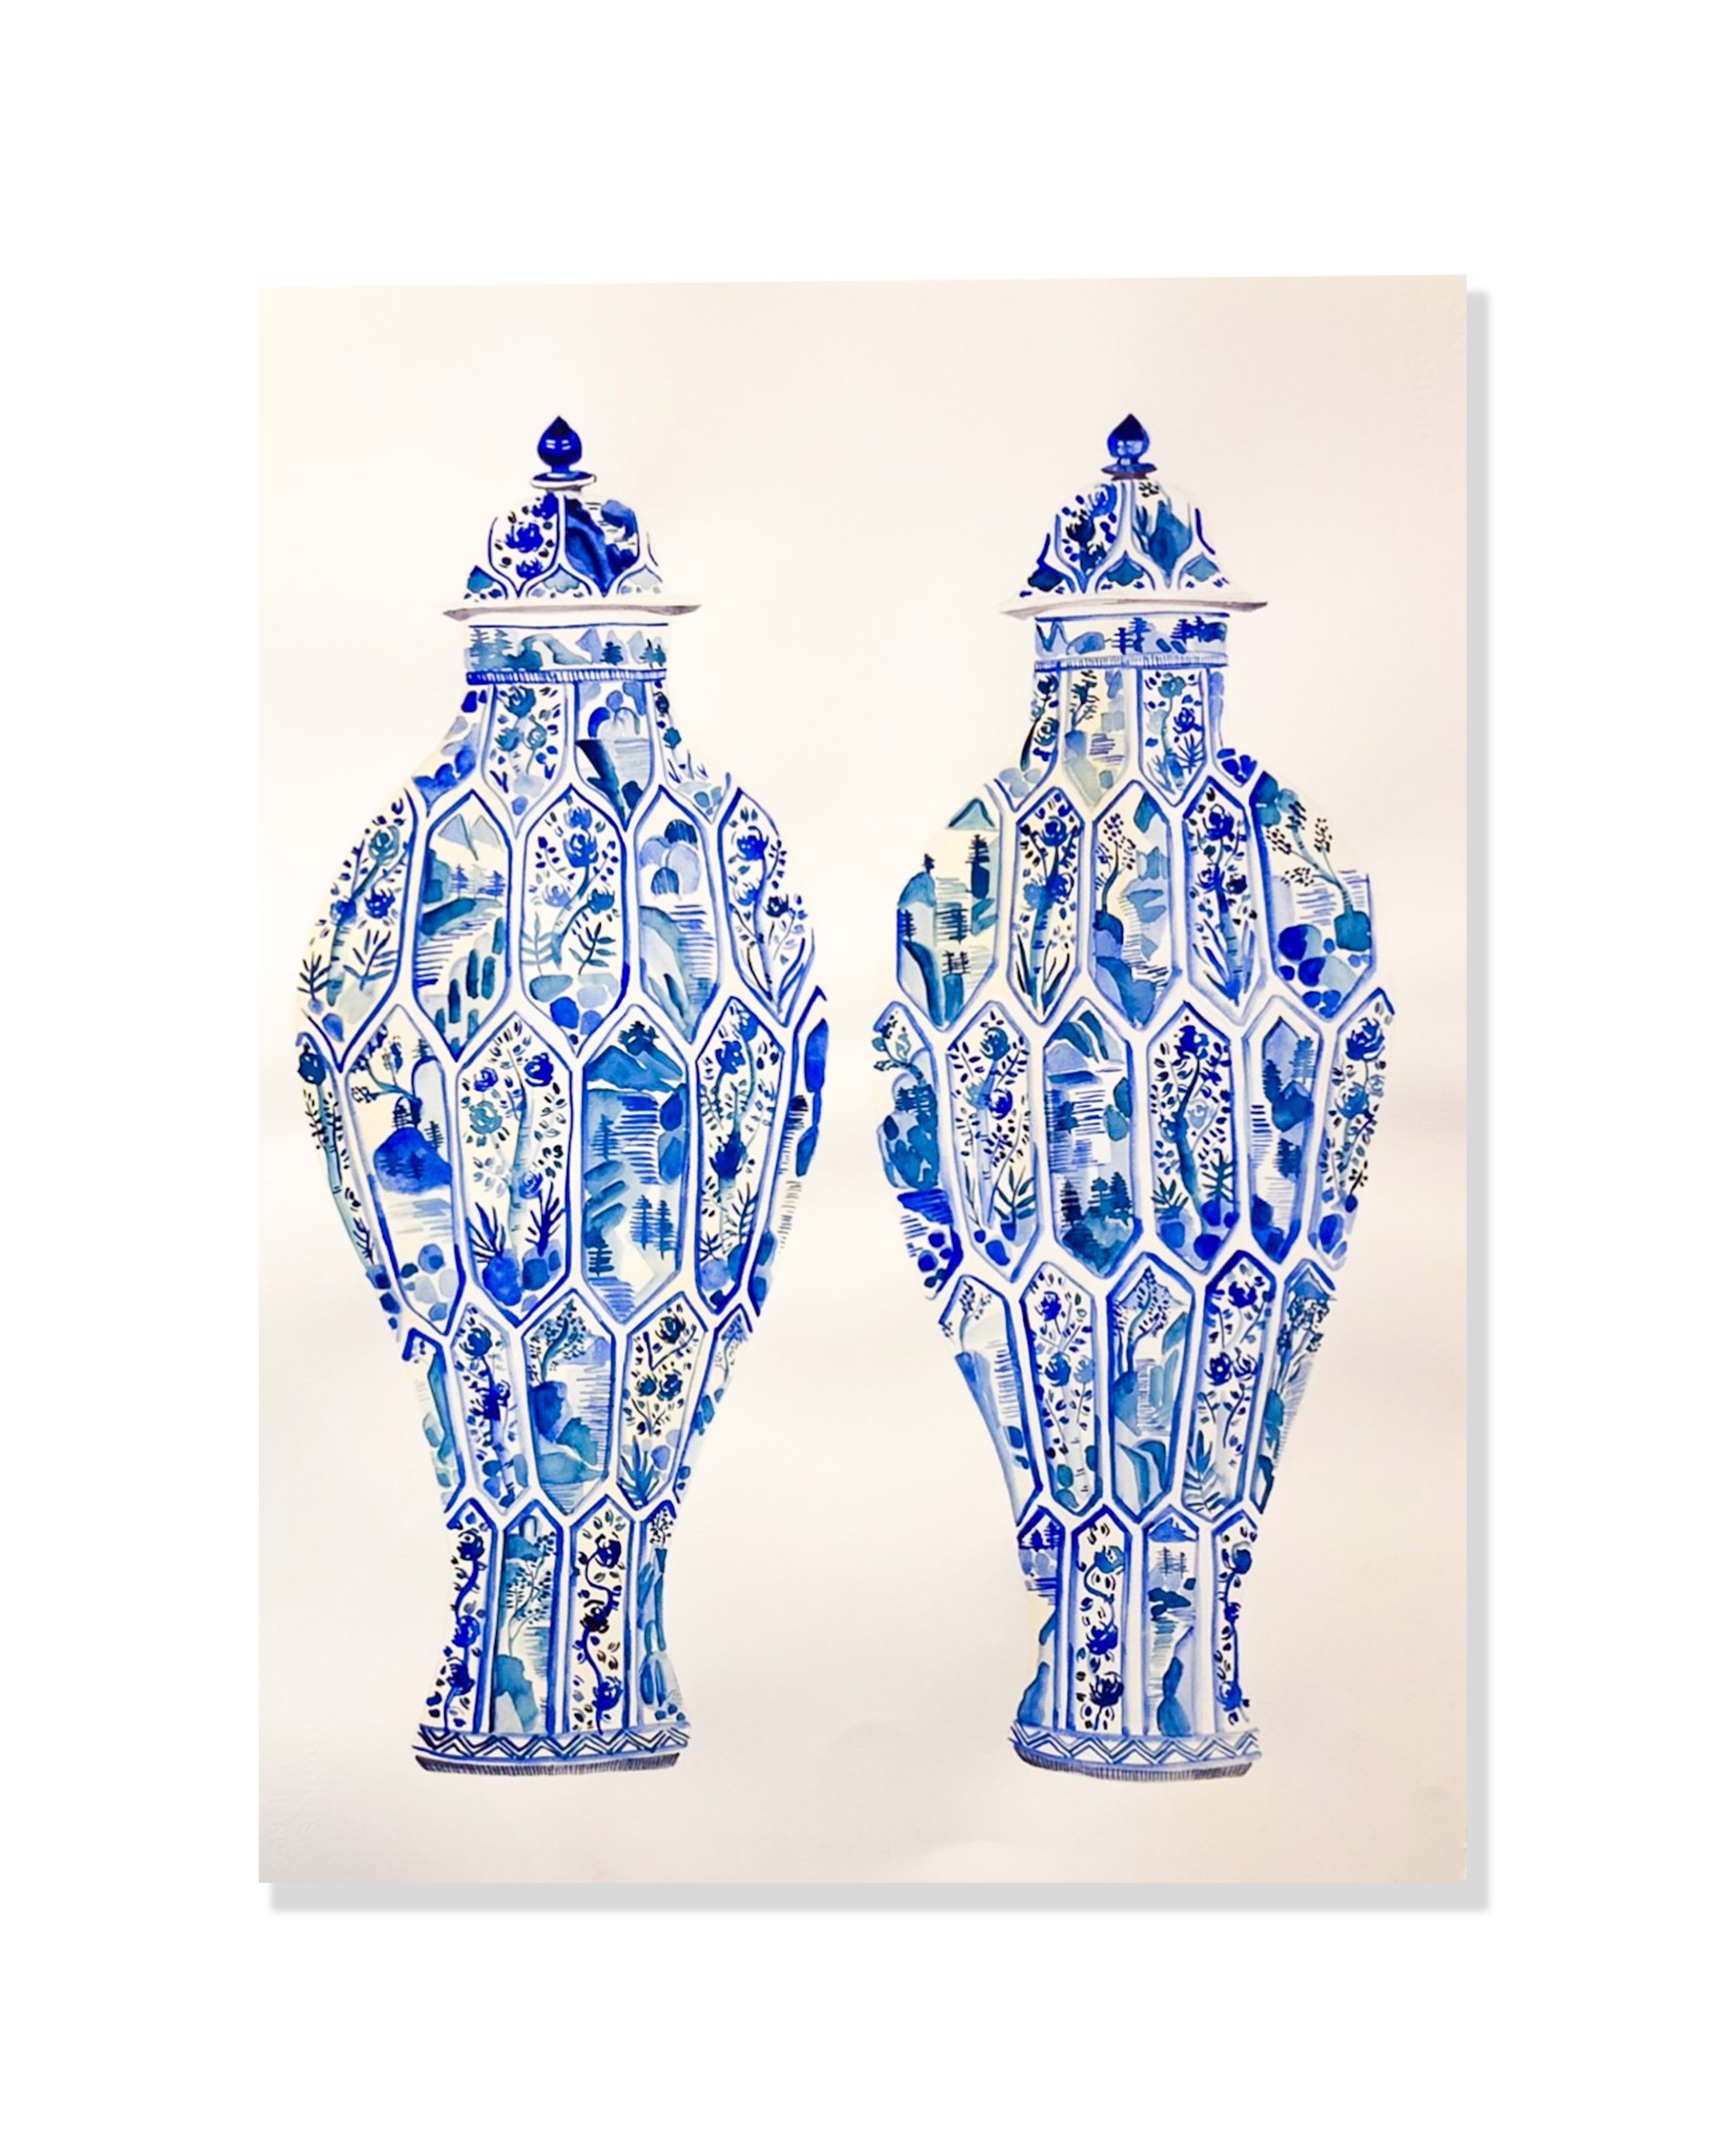 PAIR OF CHINOISERIE URNS by Adriana Oxford